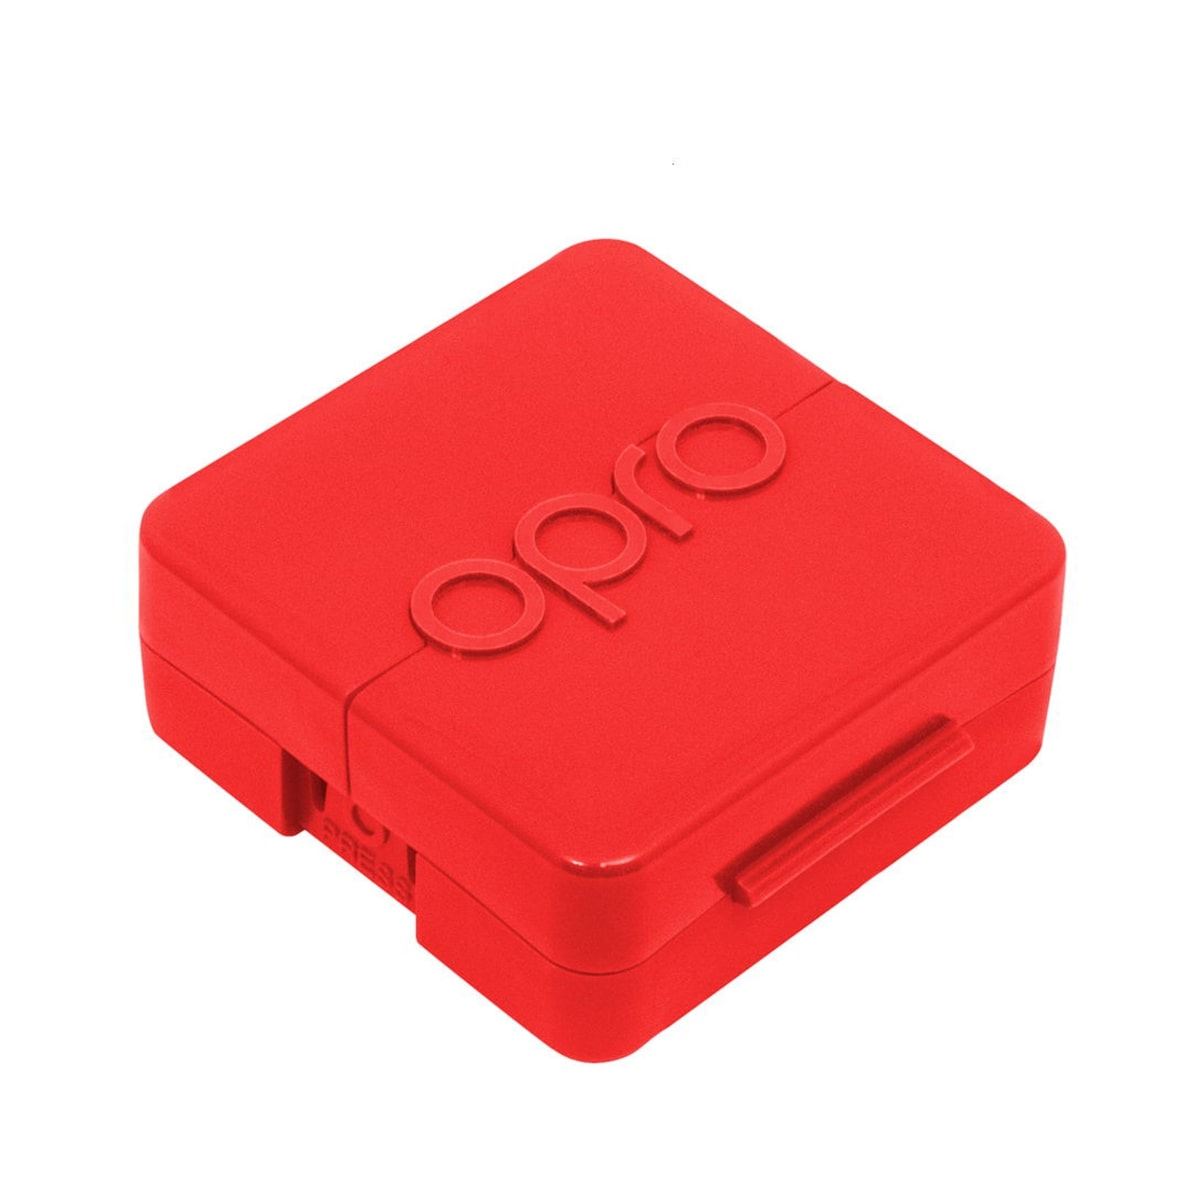 Rugby Protective Mouthguard Case OPRO Self-Fit Gen 5 Anti-Microbial Case 2022 Red